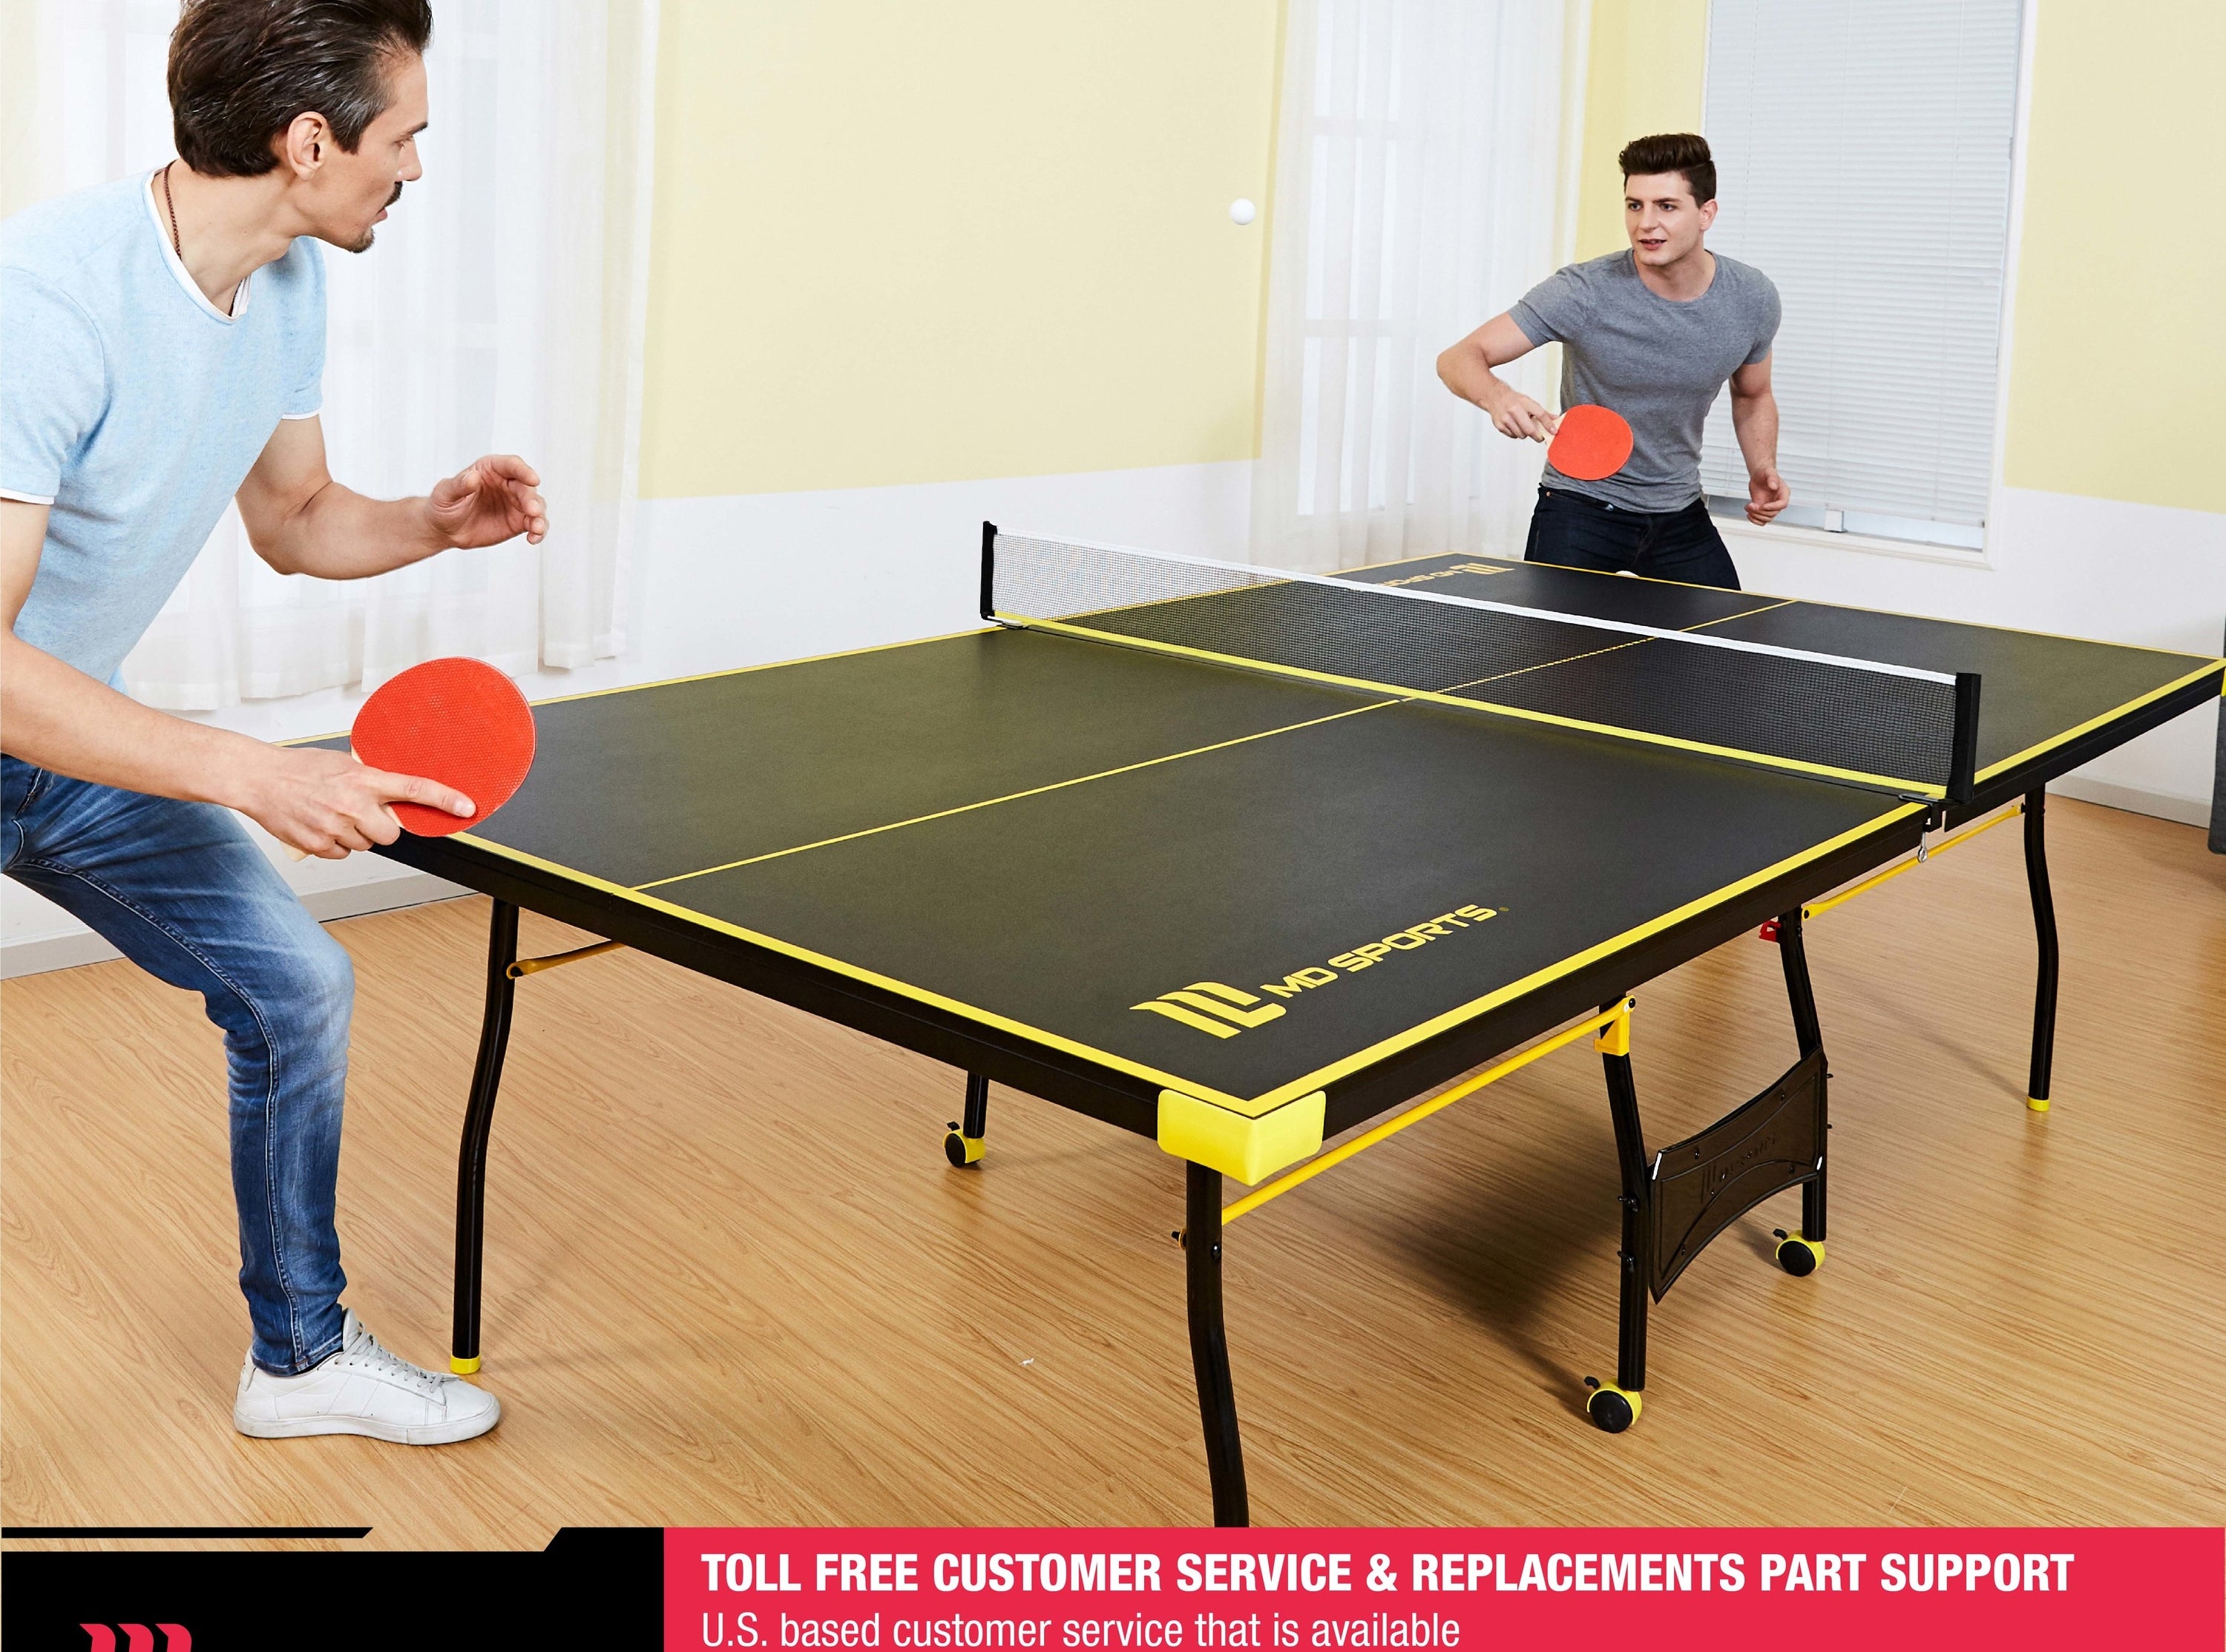 two people playing ping pong over a table tennis table